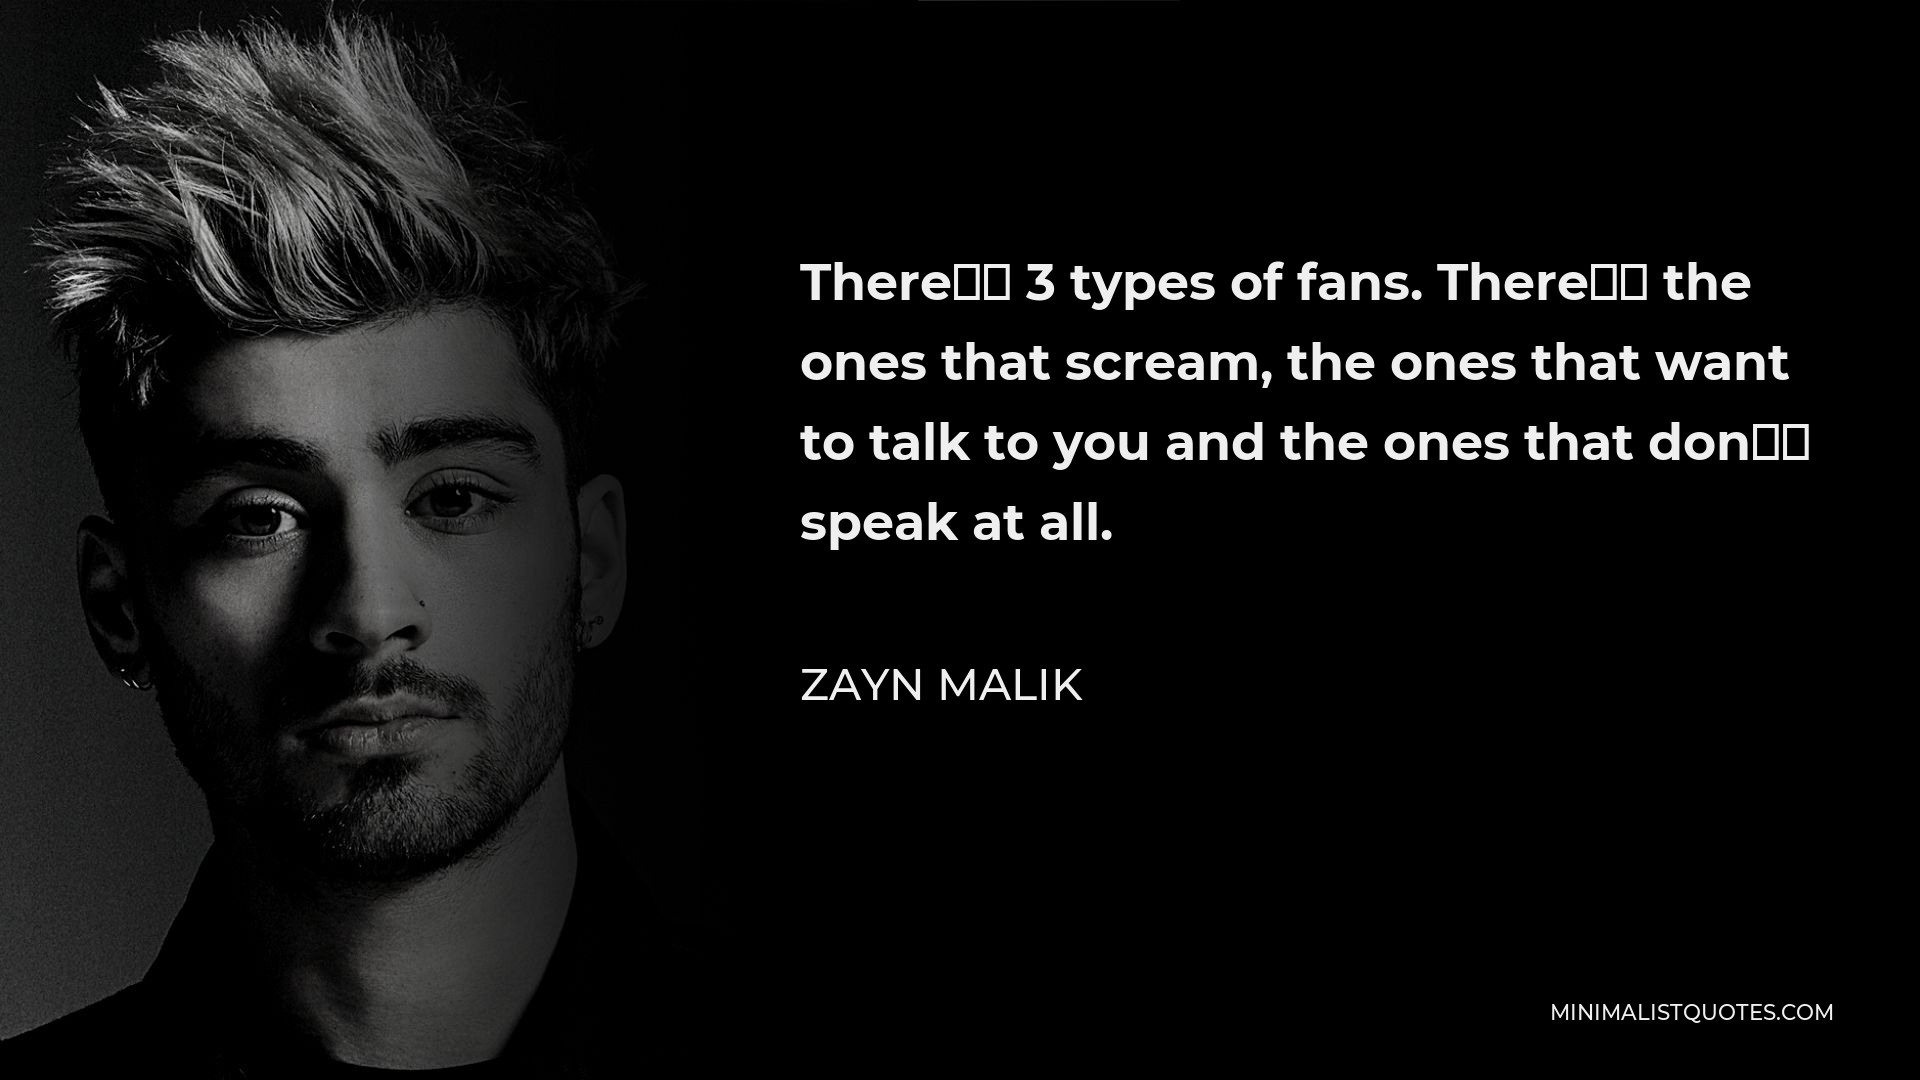 Zayn Malik Quote - There’s 3 types of fans. There’s the ones that scream, the ones that want to talk to you and the ones that don’t speak at all.